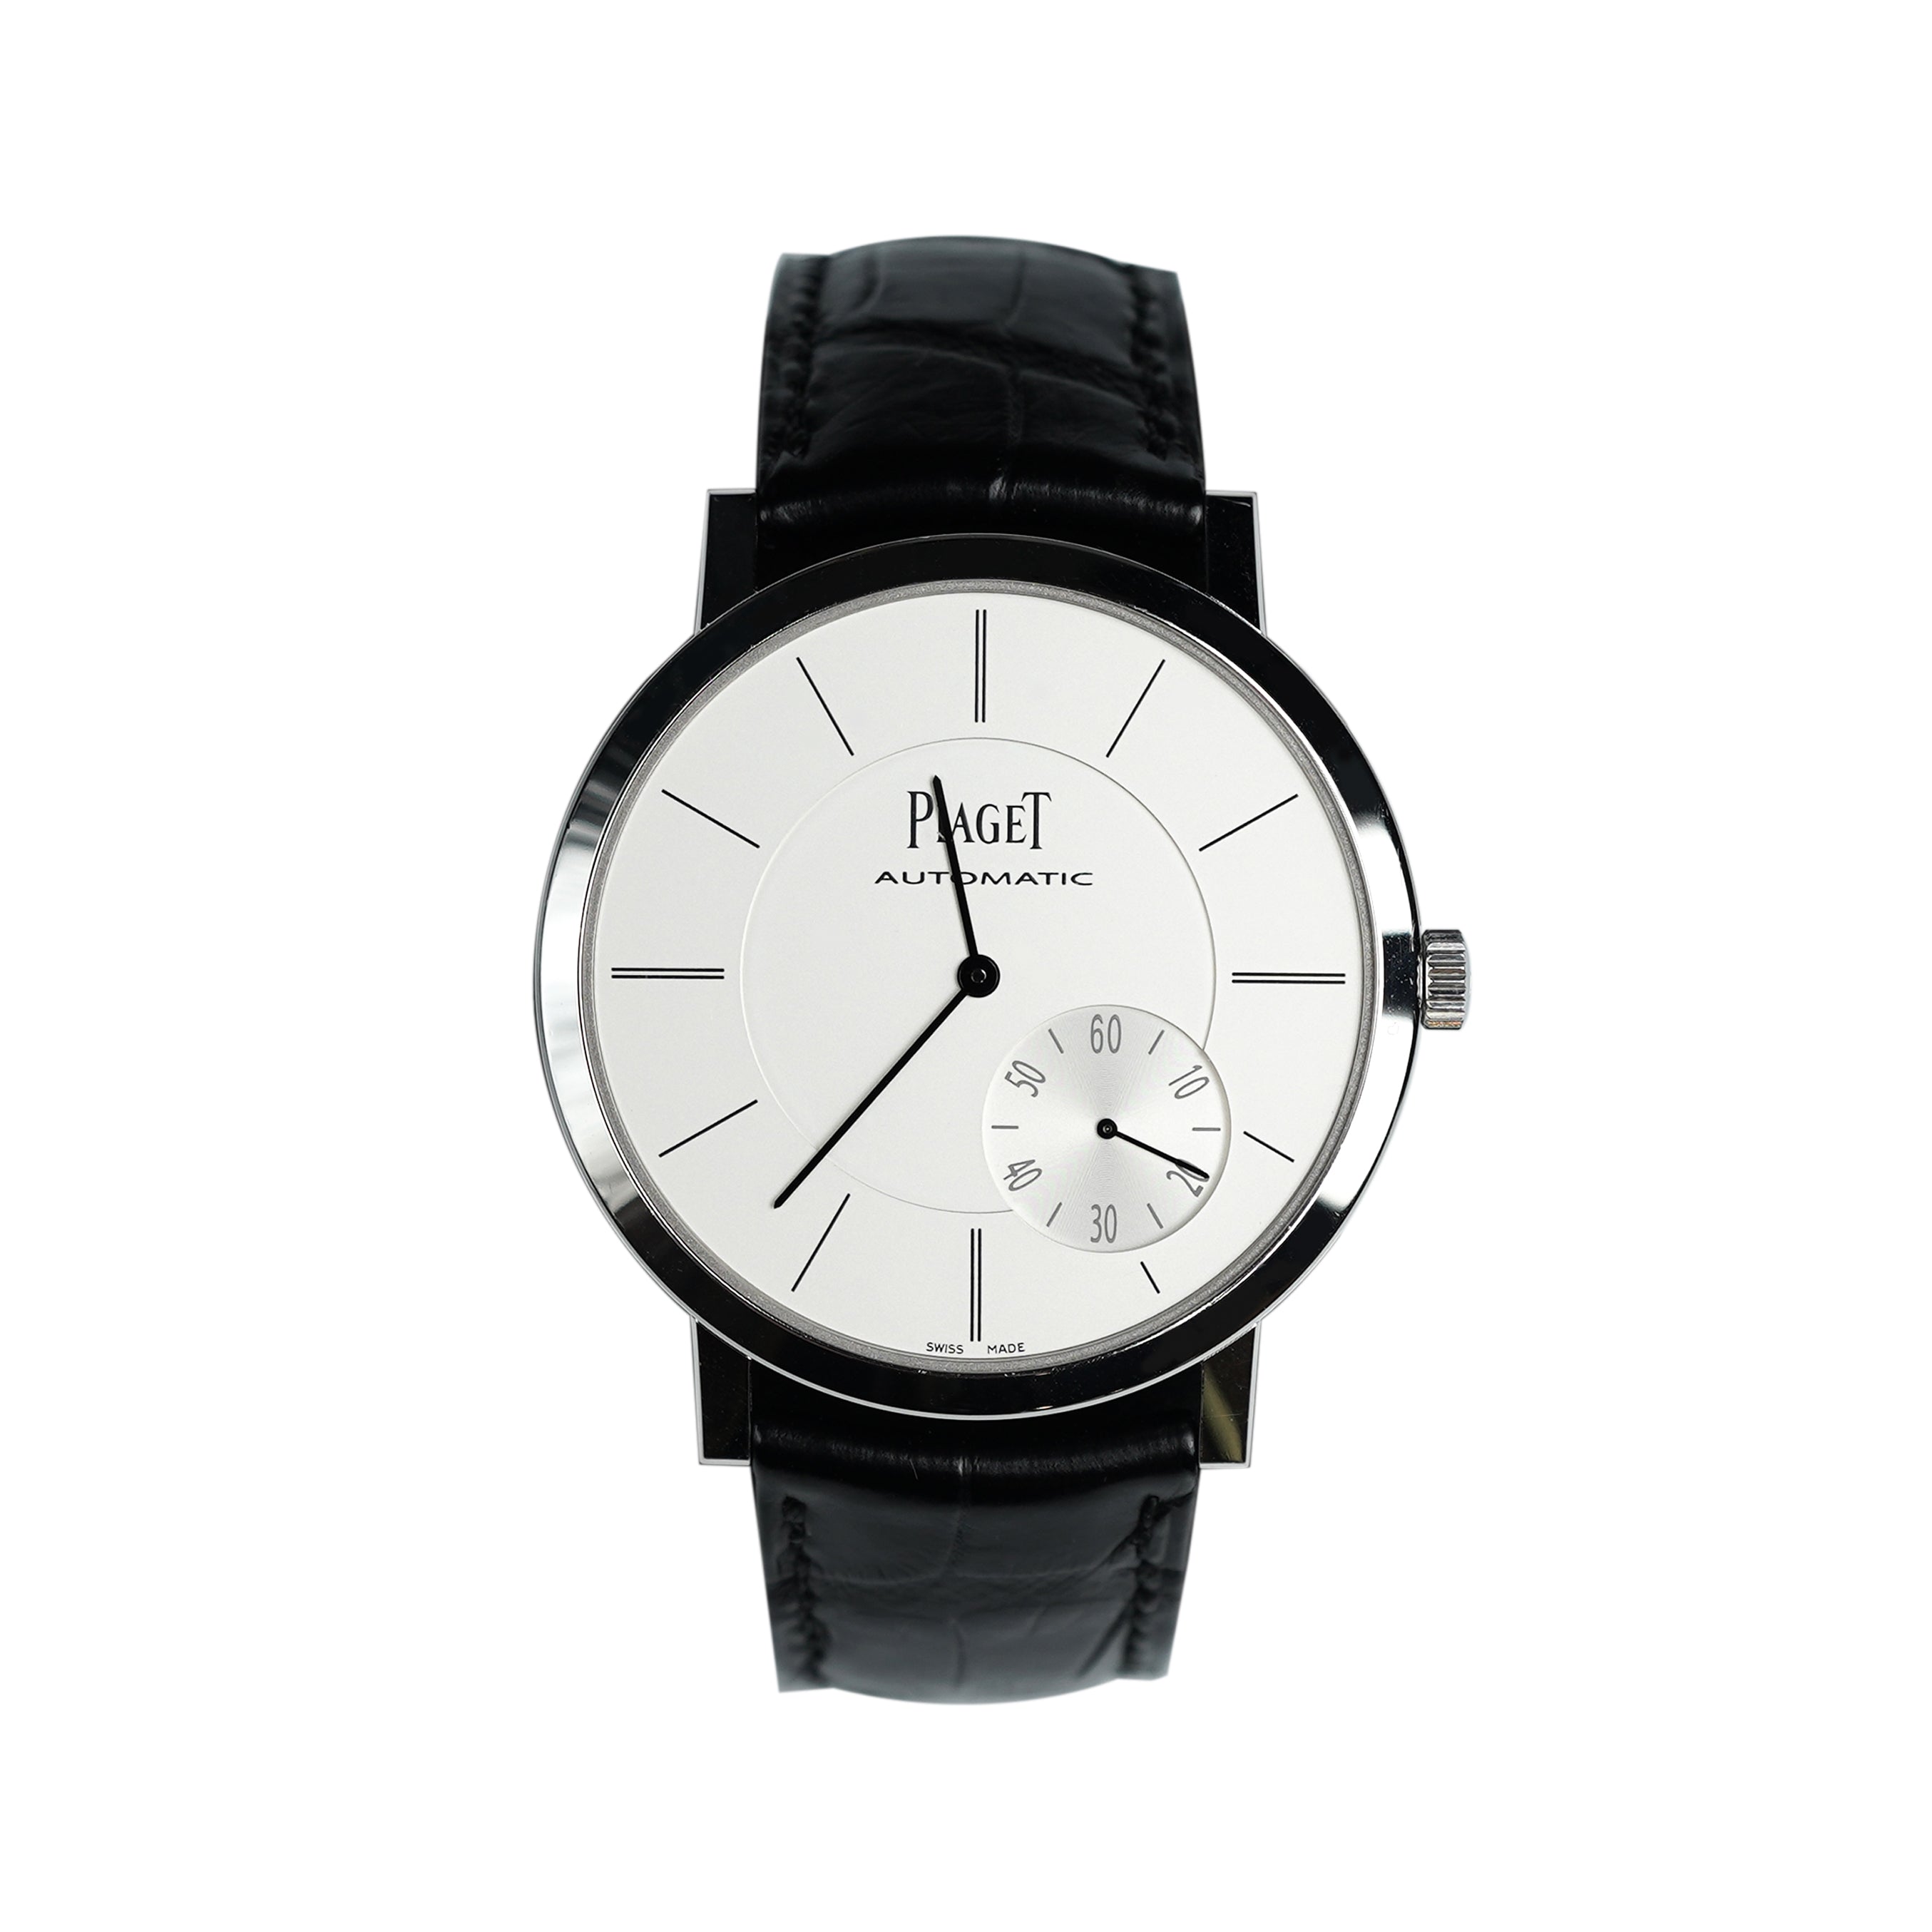 Piaget 43mm Ultra-Thin Automatic Watch in White Gold - Altiplano